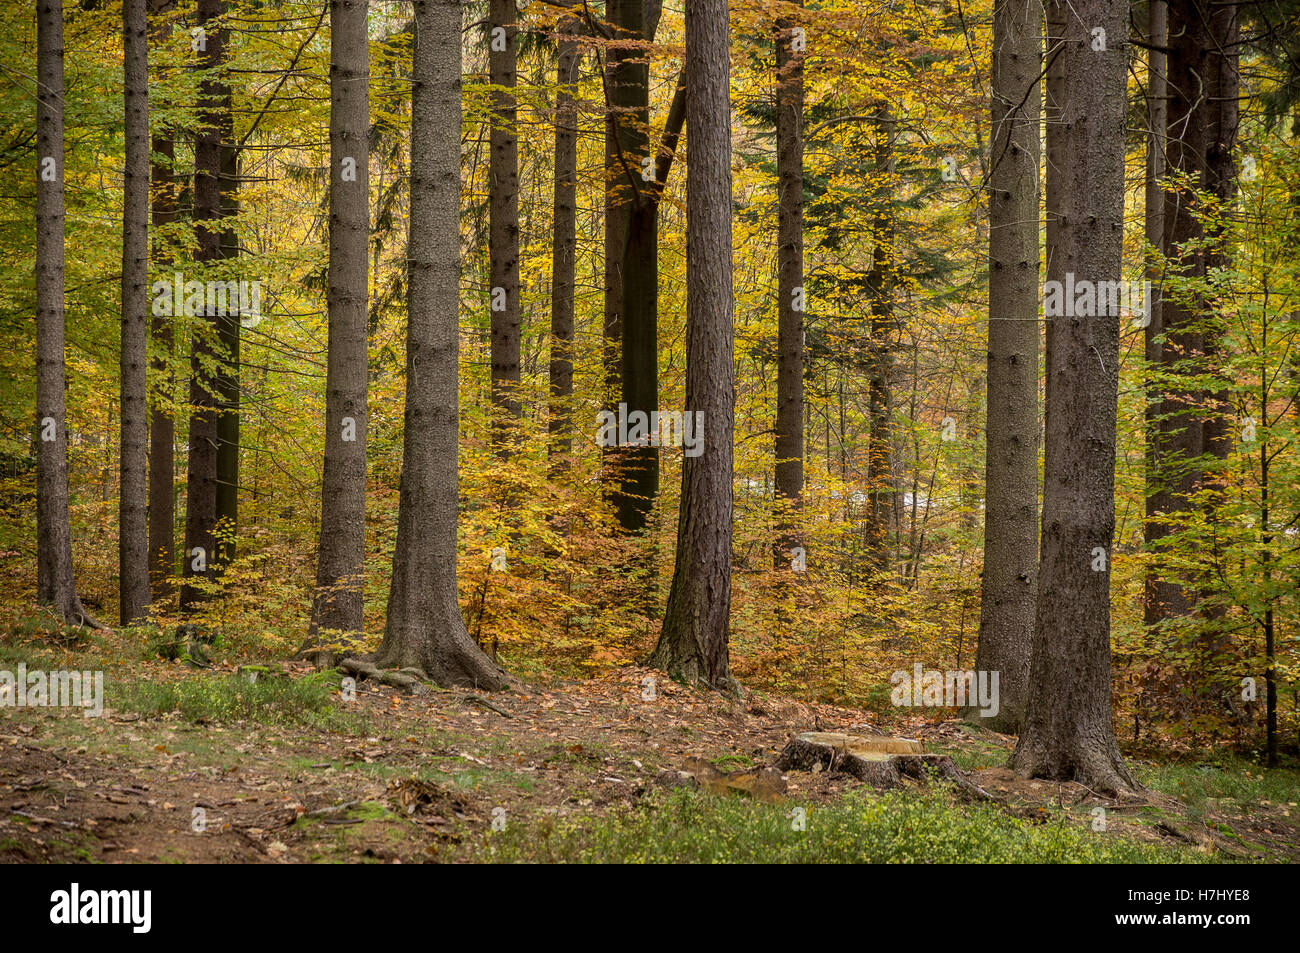 Central European colorful mixed forest in autumn Stock Photo